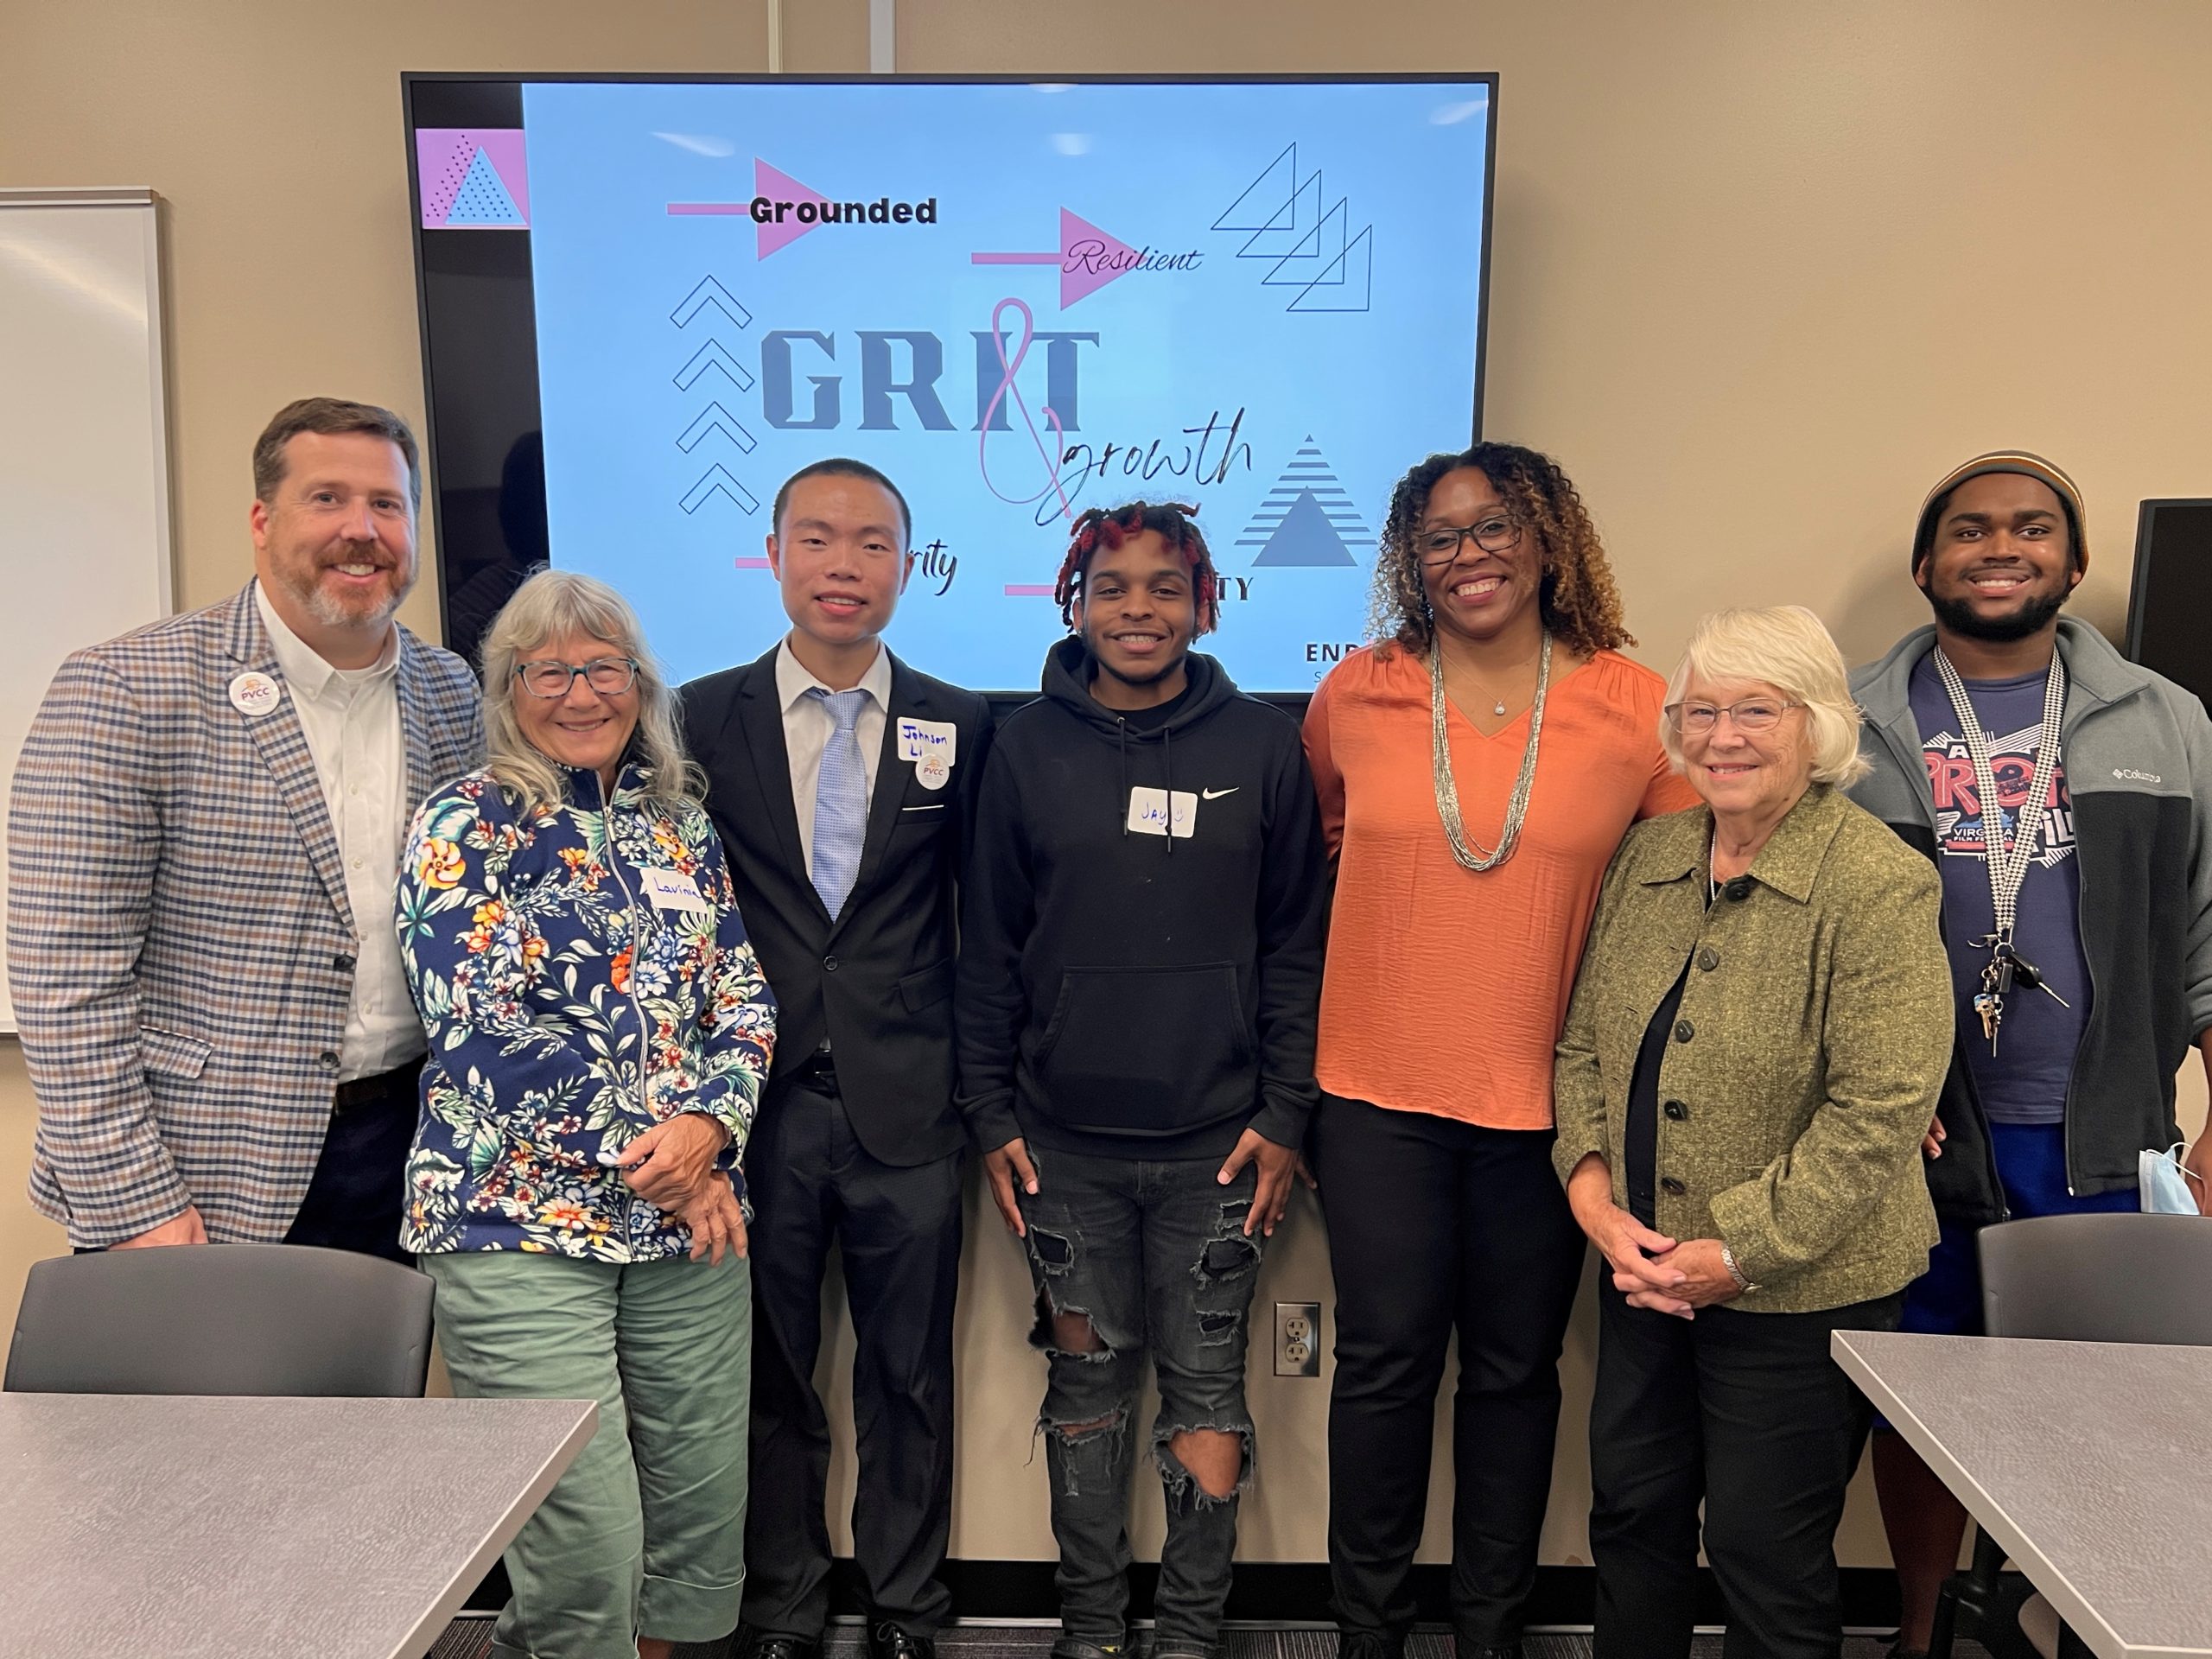 Smithbey, Shawn Sanders, Beverly Baber, Malcom James, and others all smile for the camera after the GRIT event.